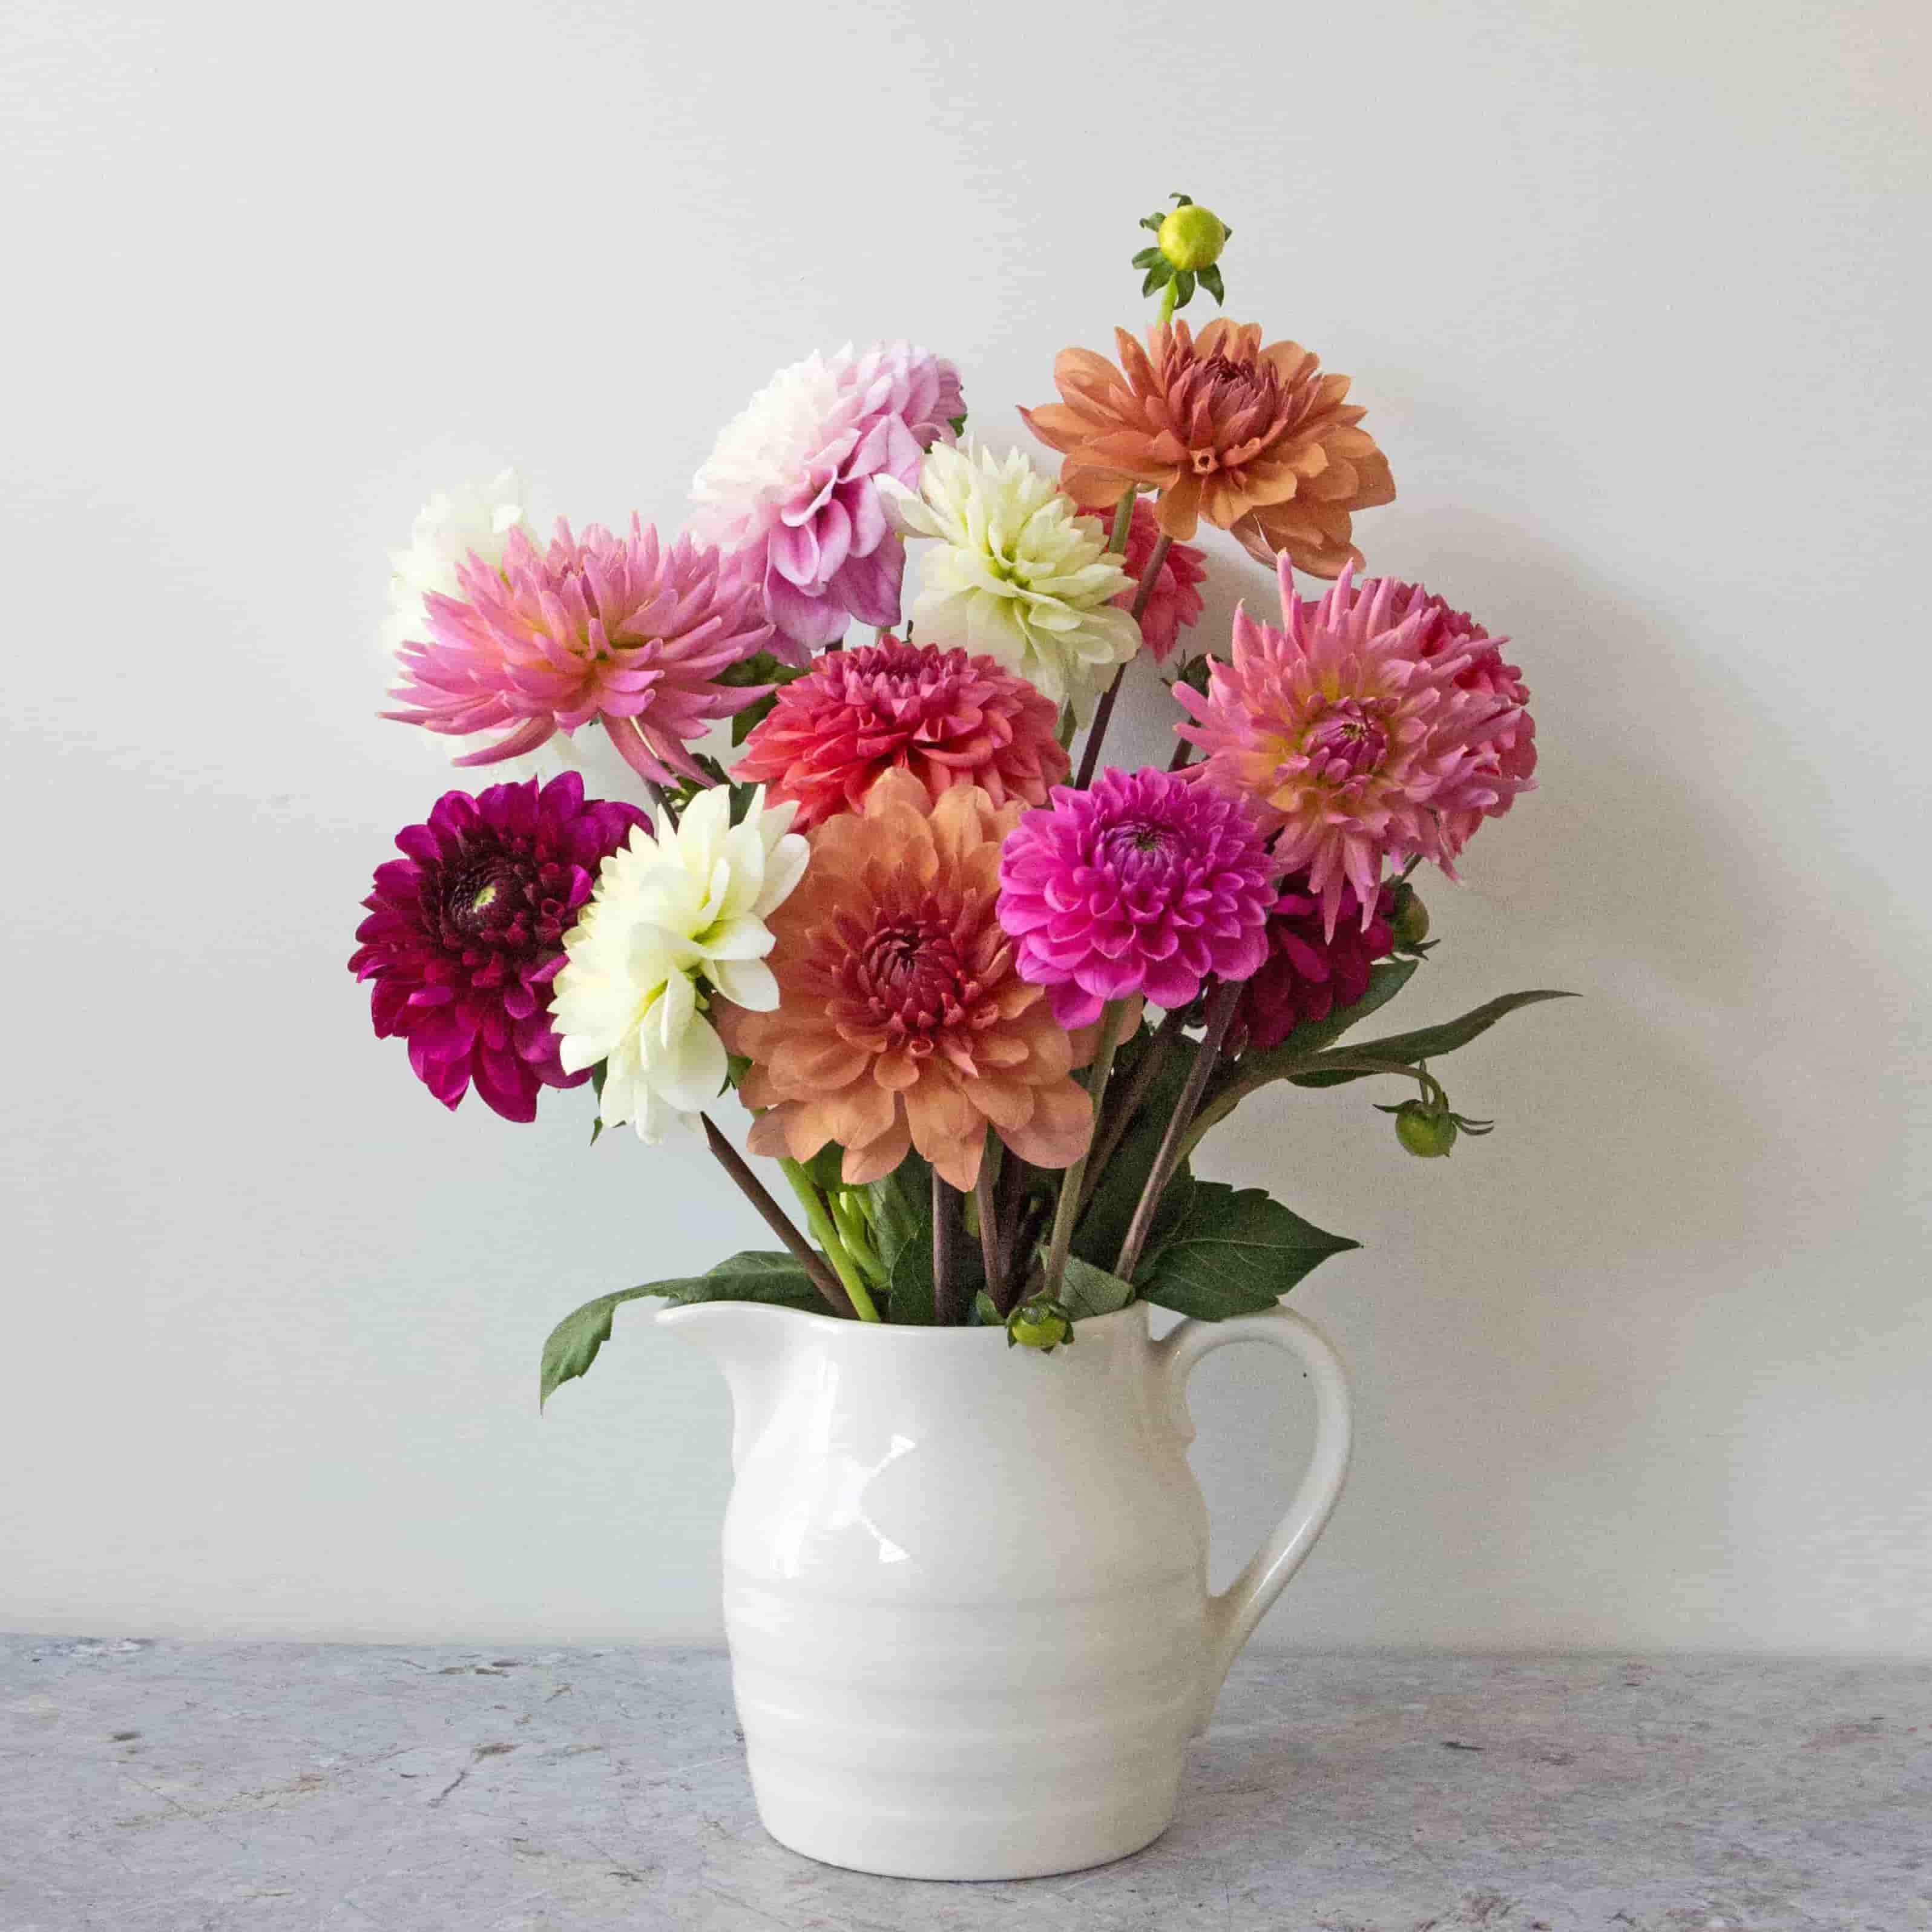 10 Delightful Facts about Dahlias